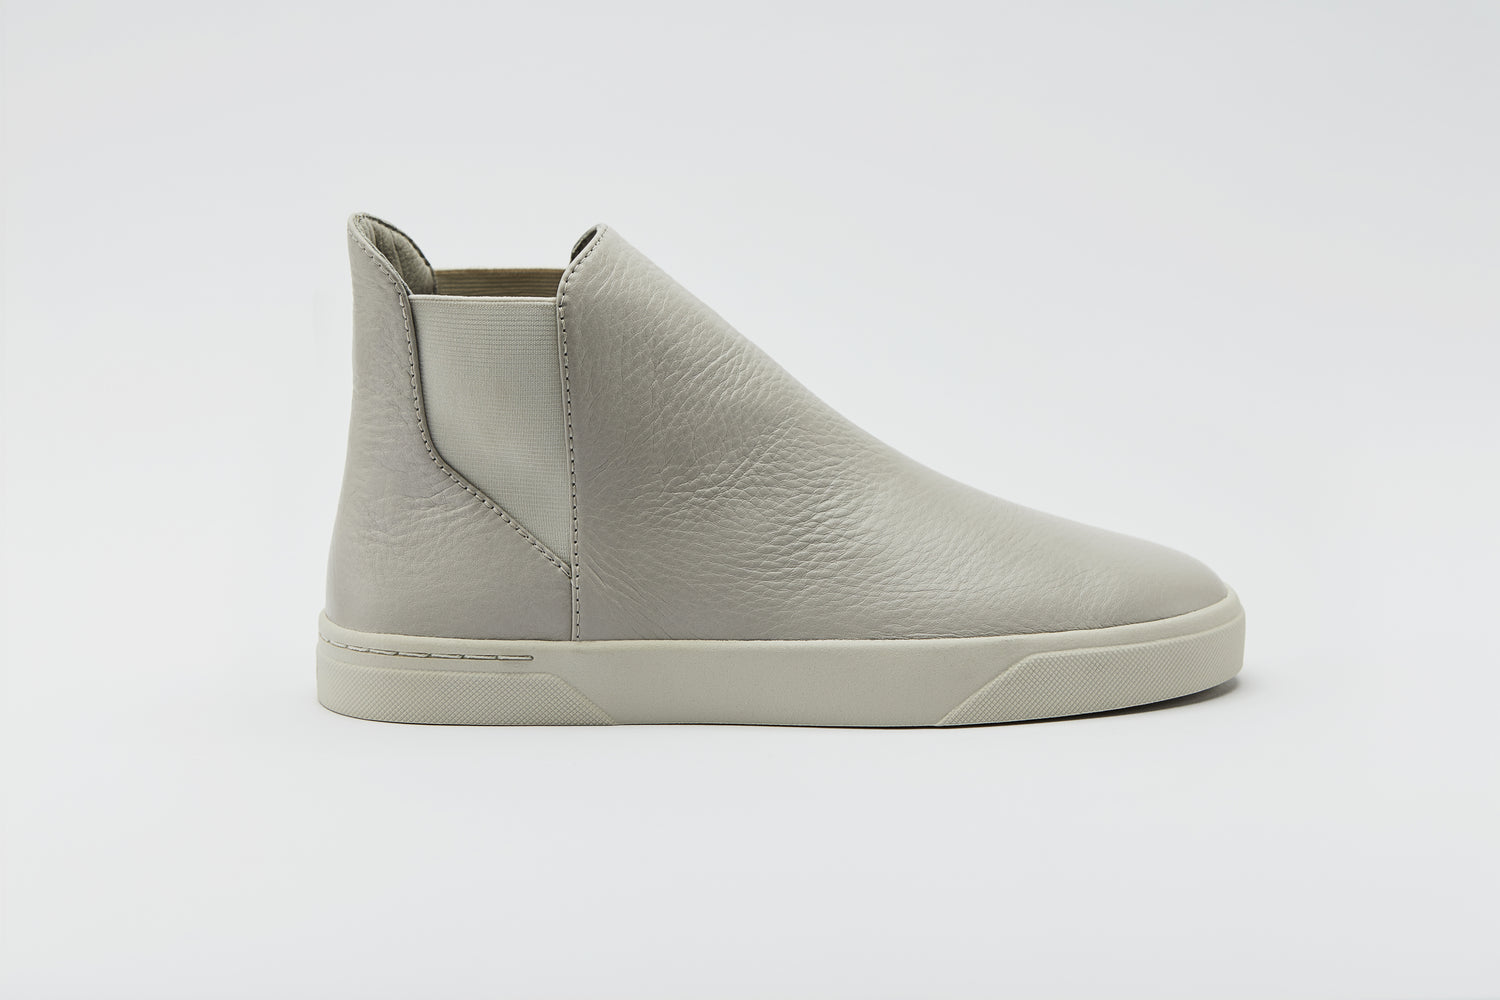 Elegant Chelsea boot inspired sneaker, made in Germany with finest leathers.